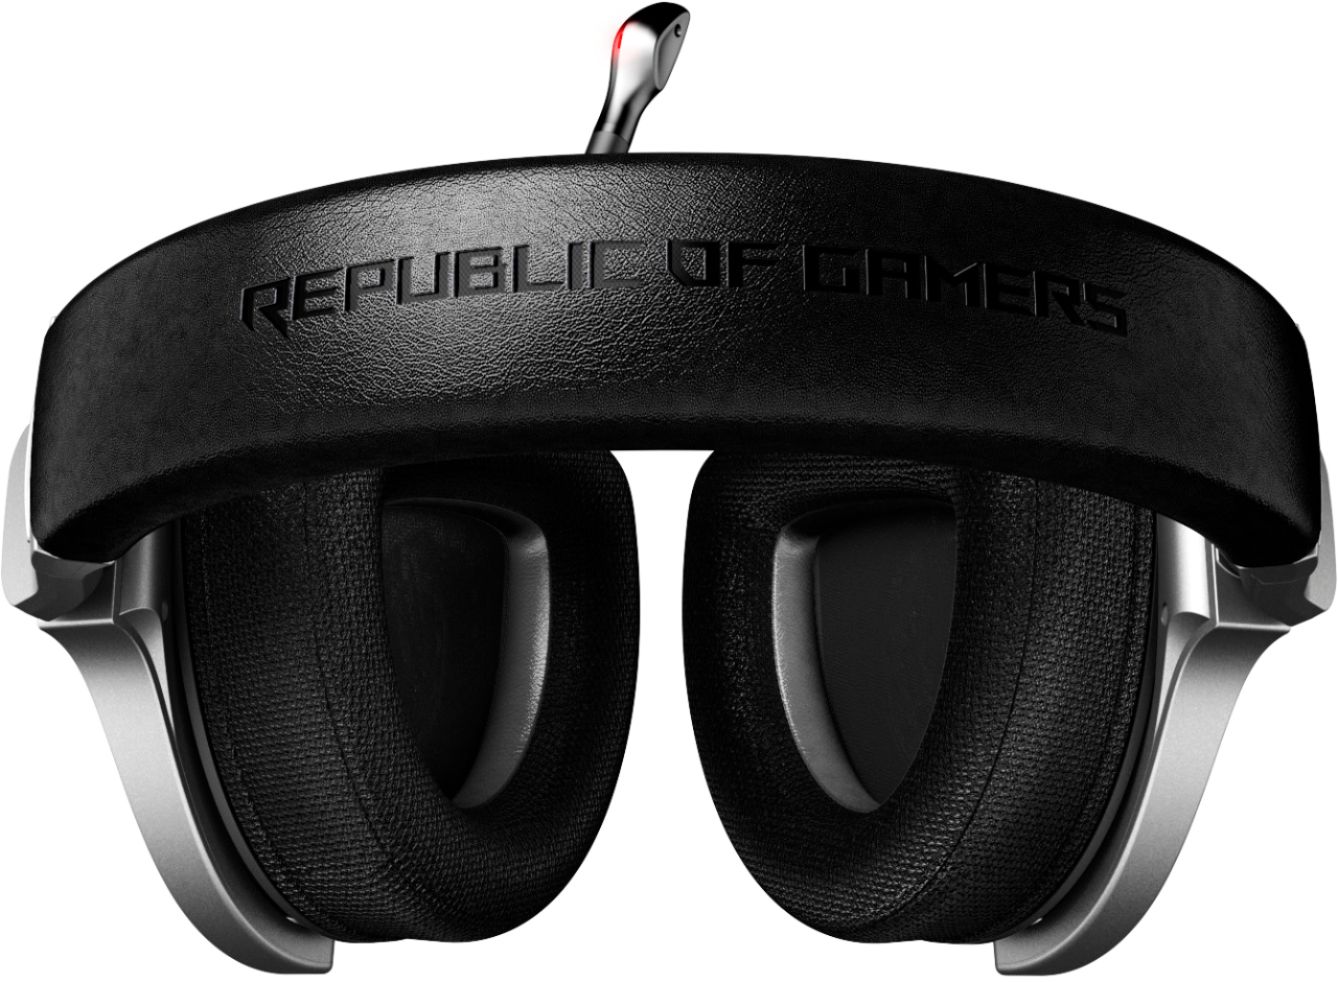 ROG Delta S Wireless  Gaming headsets-audio｜ROG - Republic of Gamers｜ROG  Global